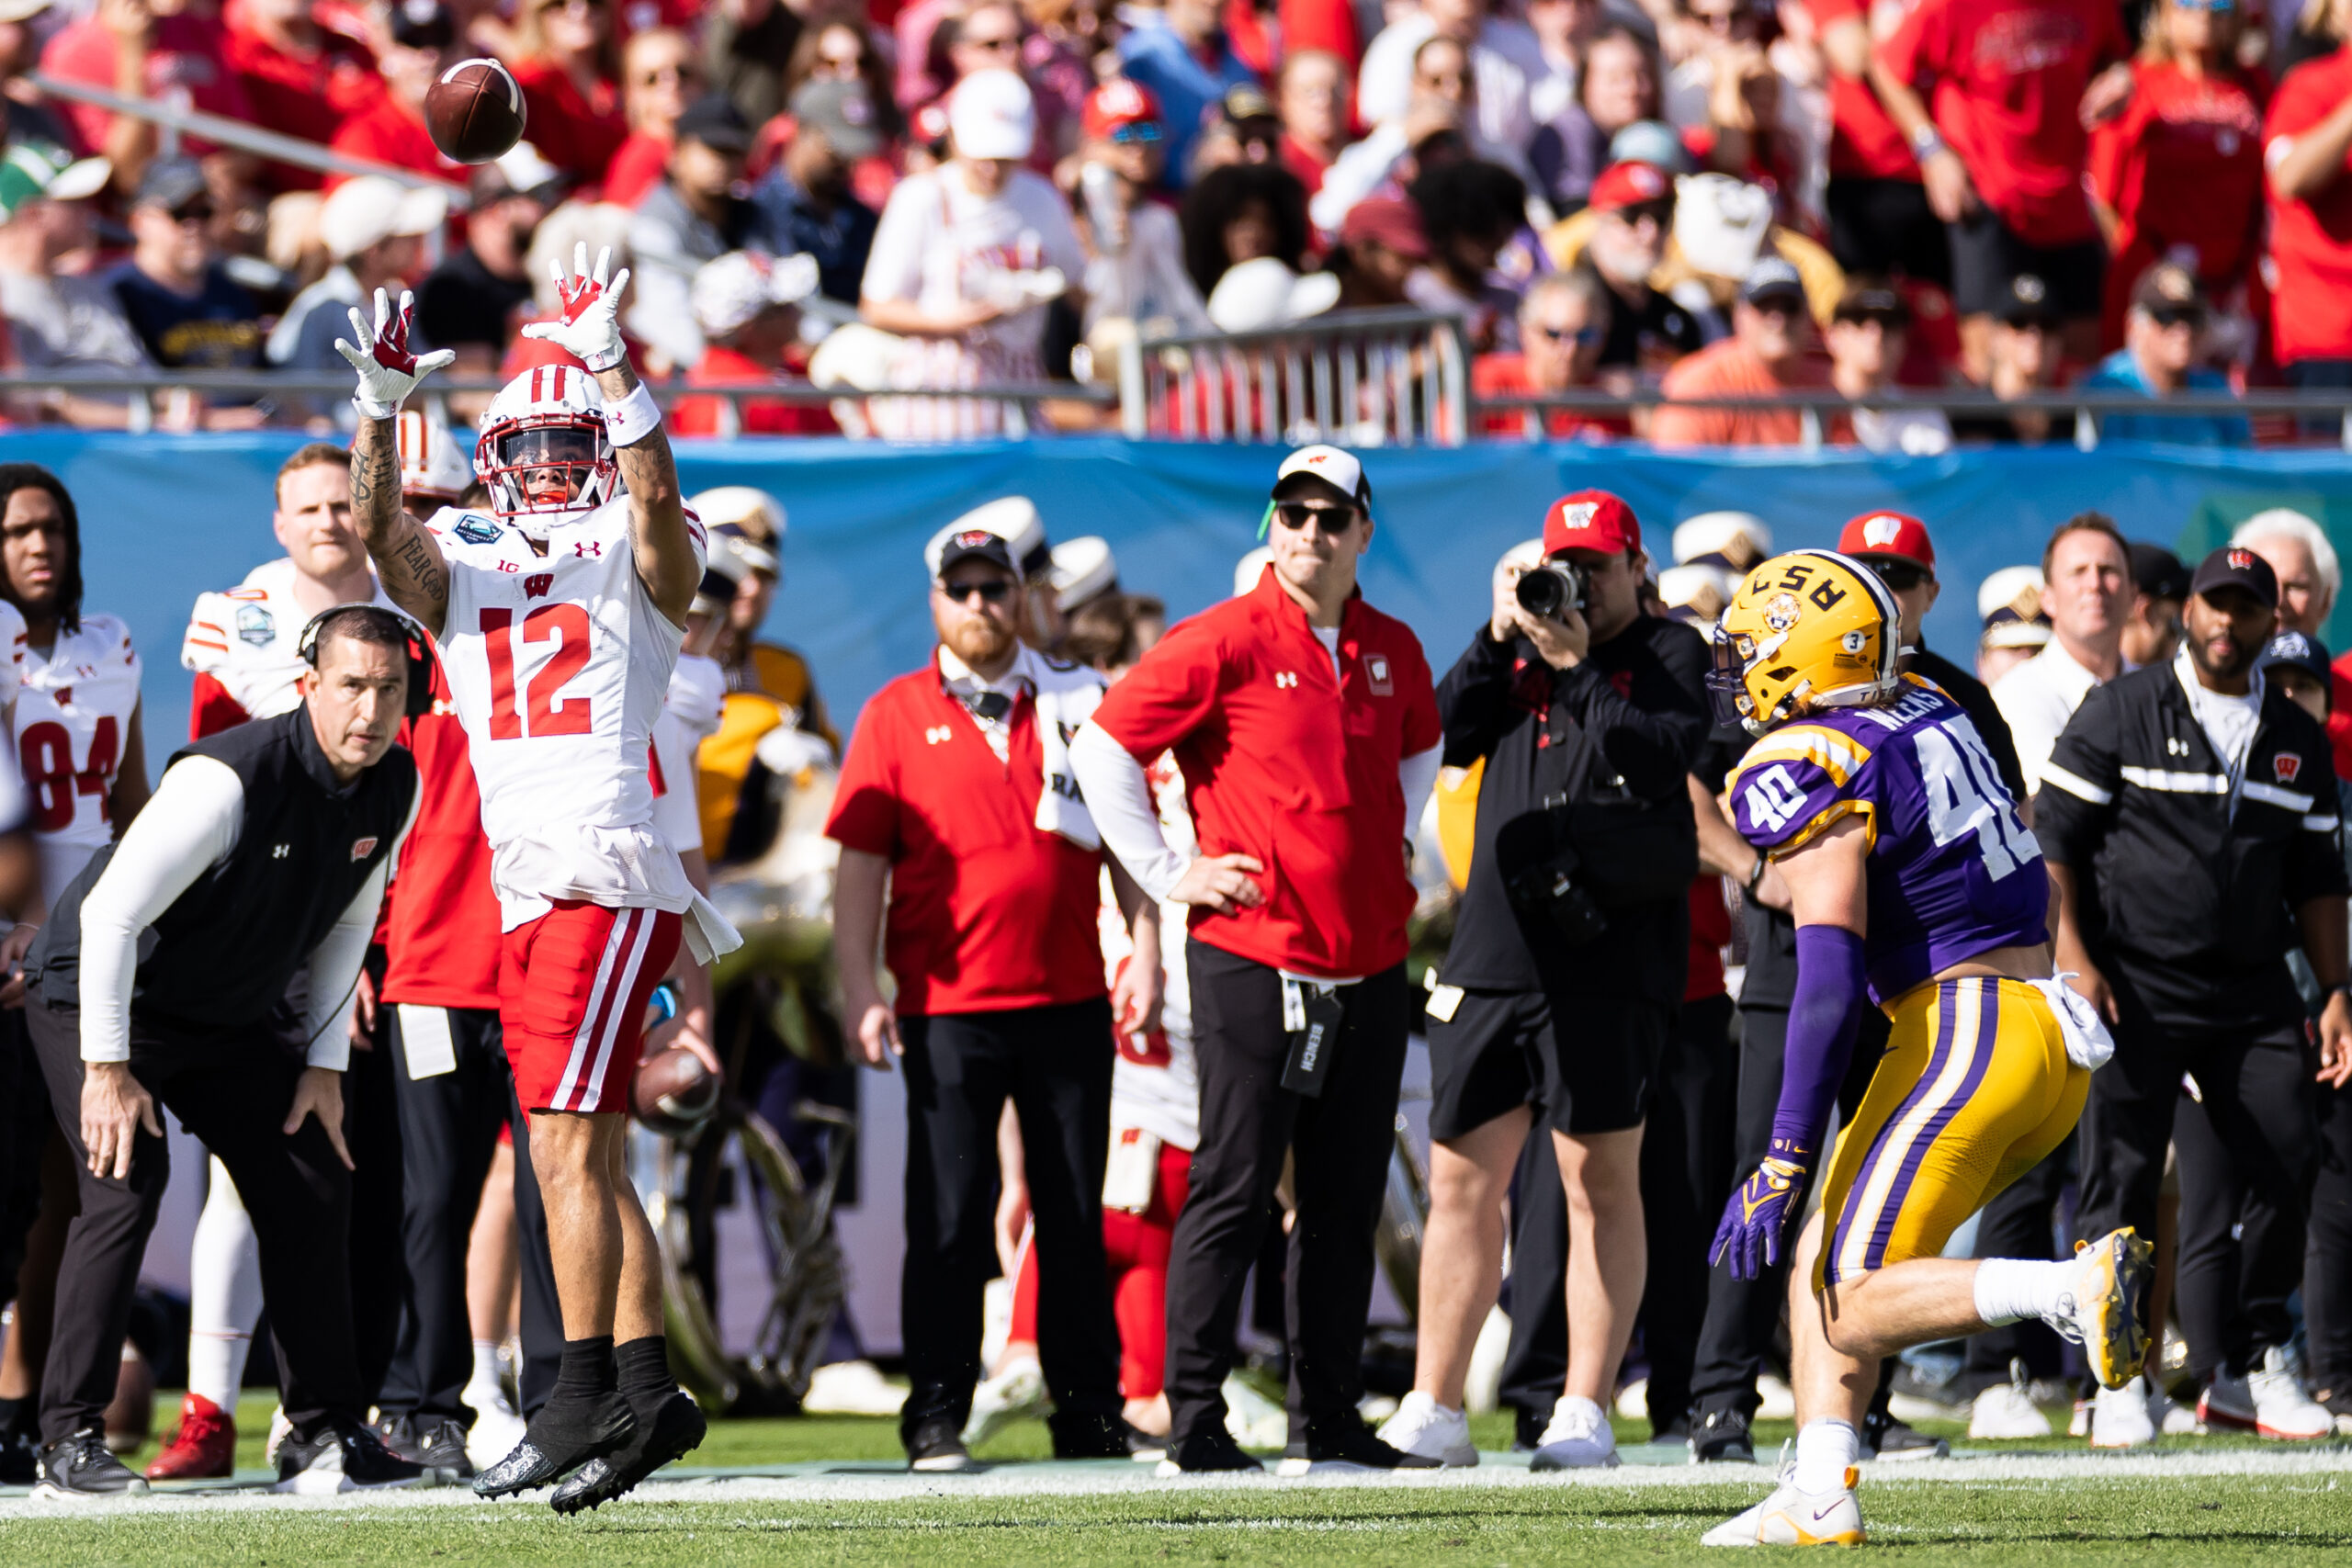 Wisconsin football; Badgers wide receiver Trech Kekahuna catches the ball against LSU